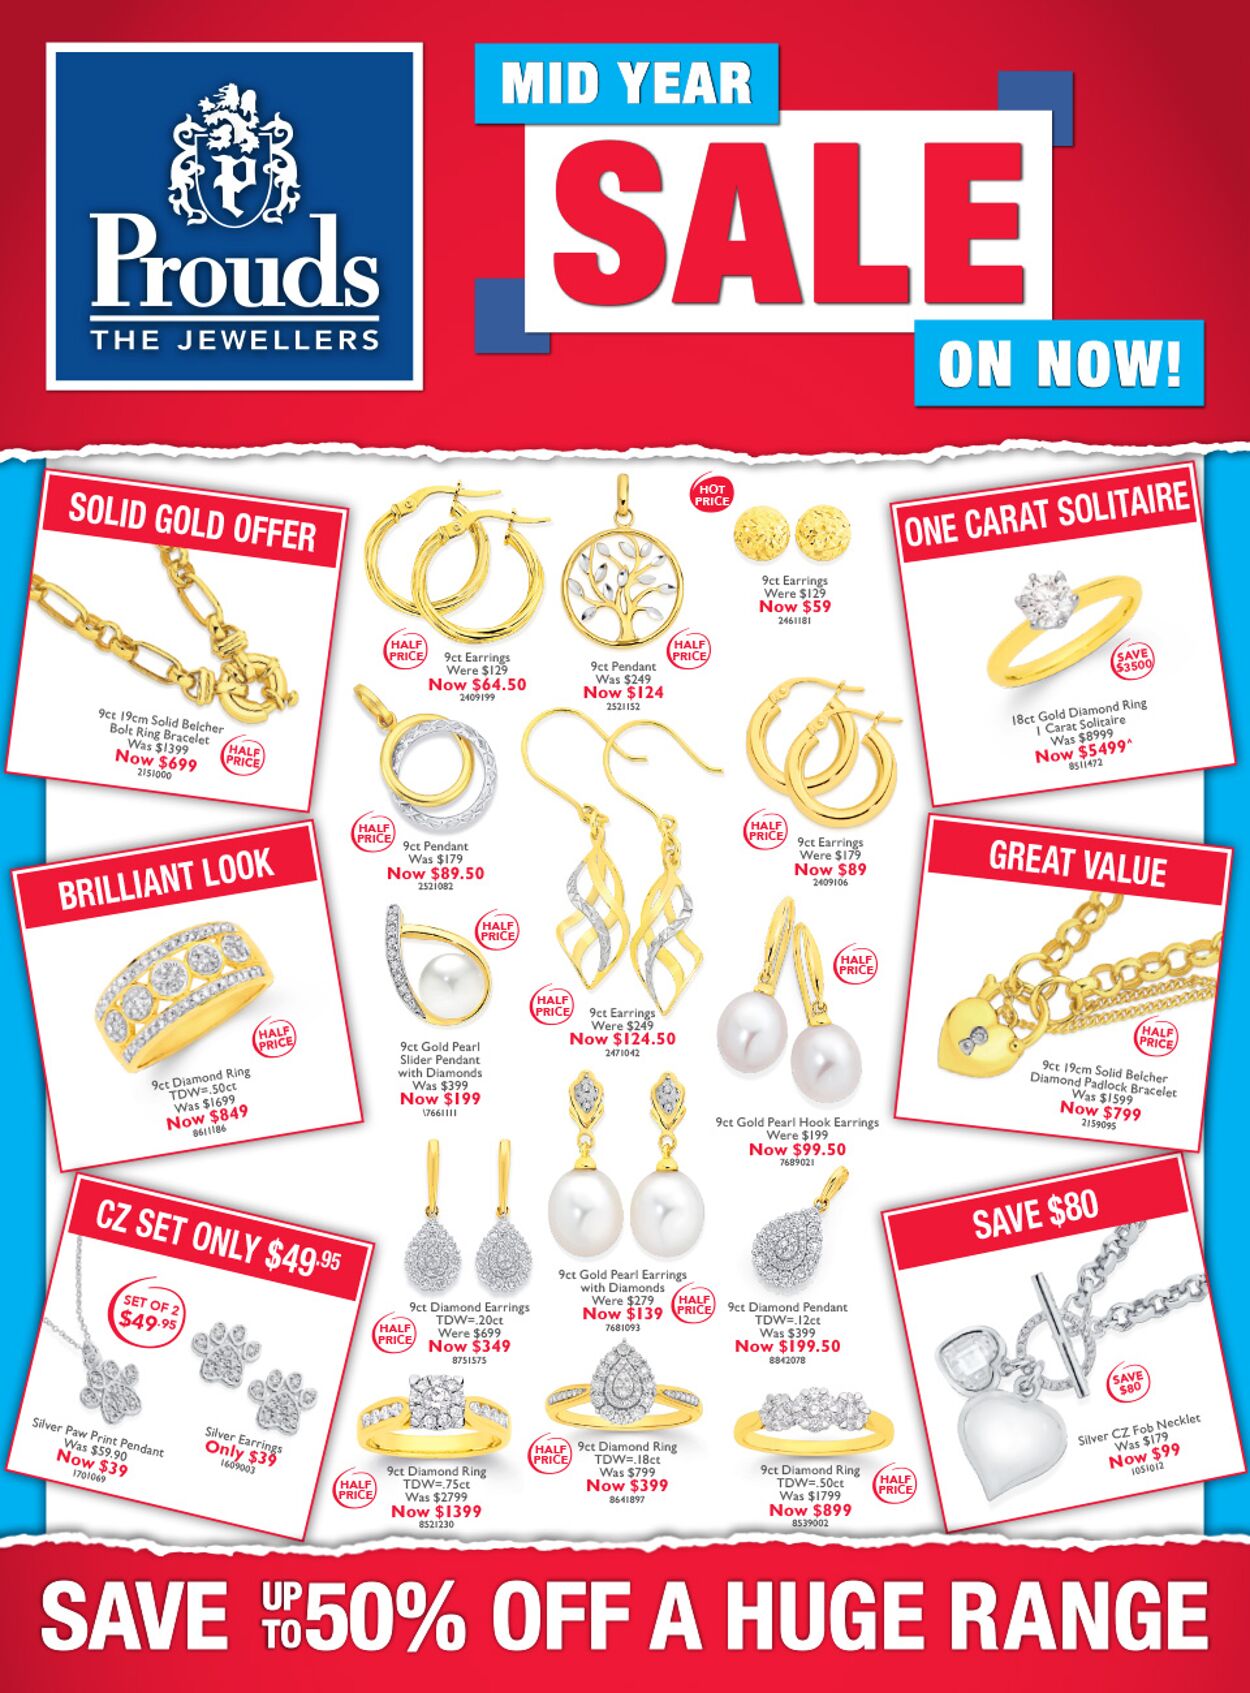 Prouds The Jewellers Promotional catalogues